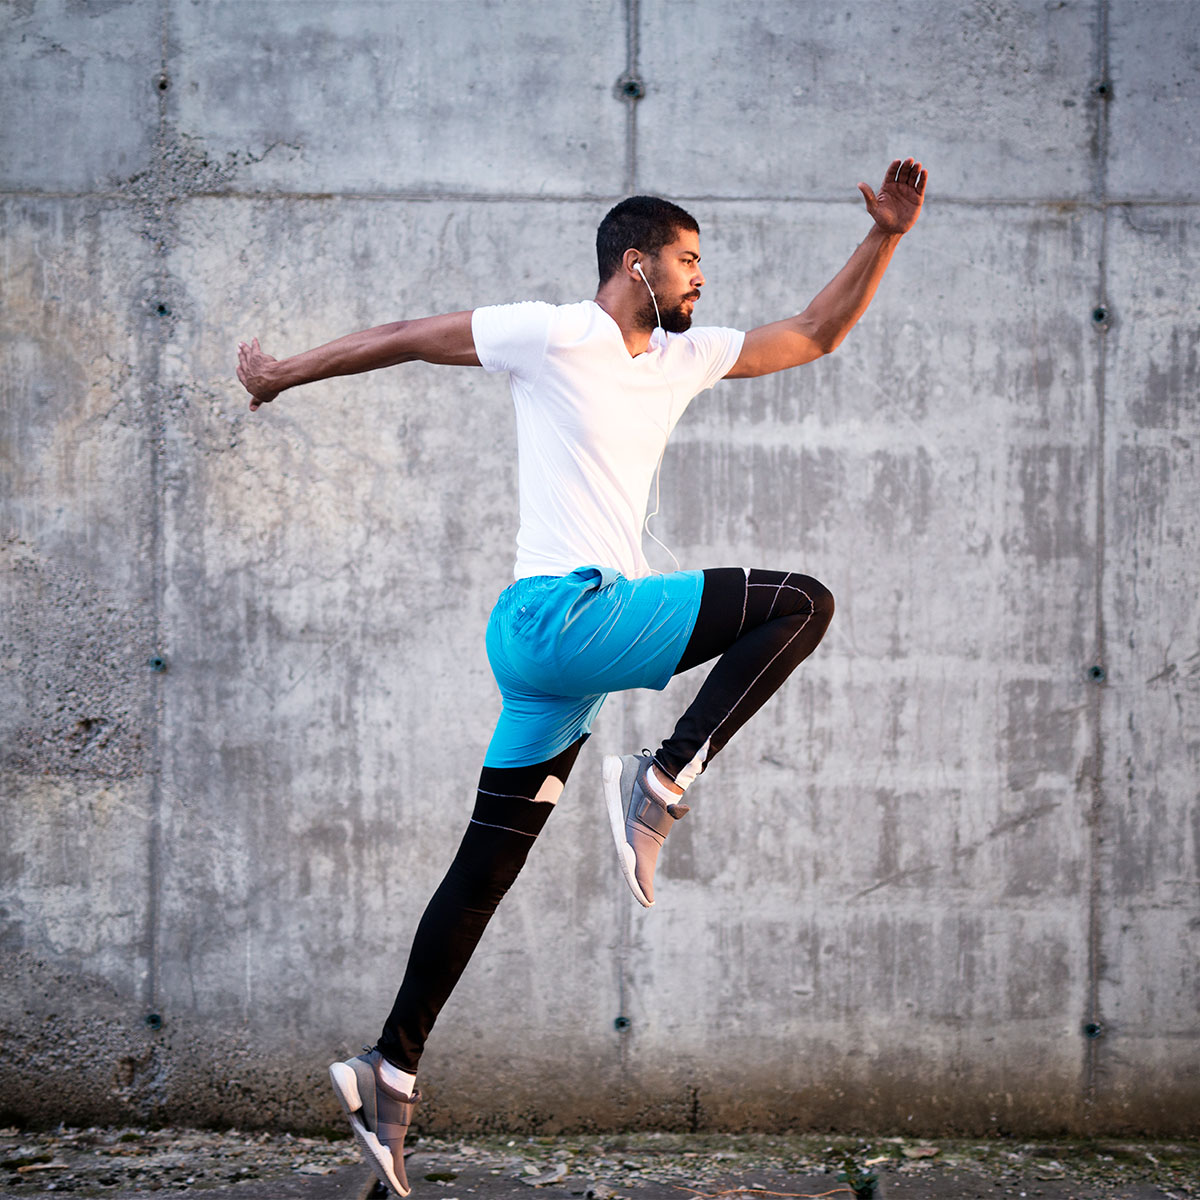 shot-young-sporty-athlete-jump-against-concrete-wall-background-square